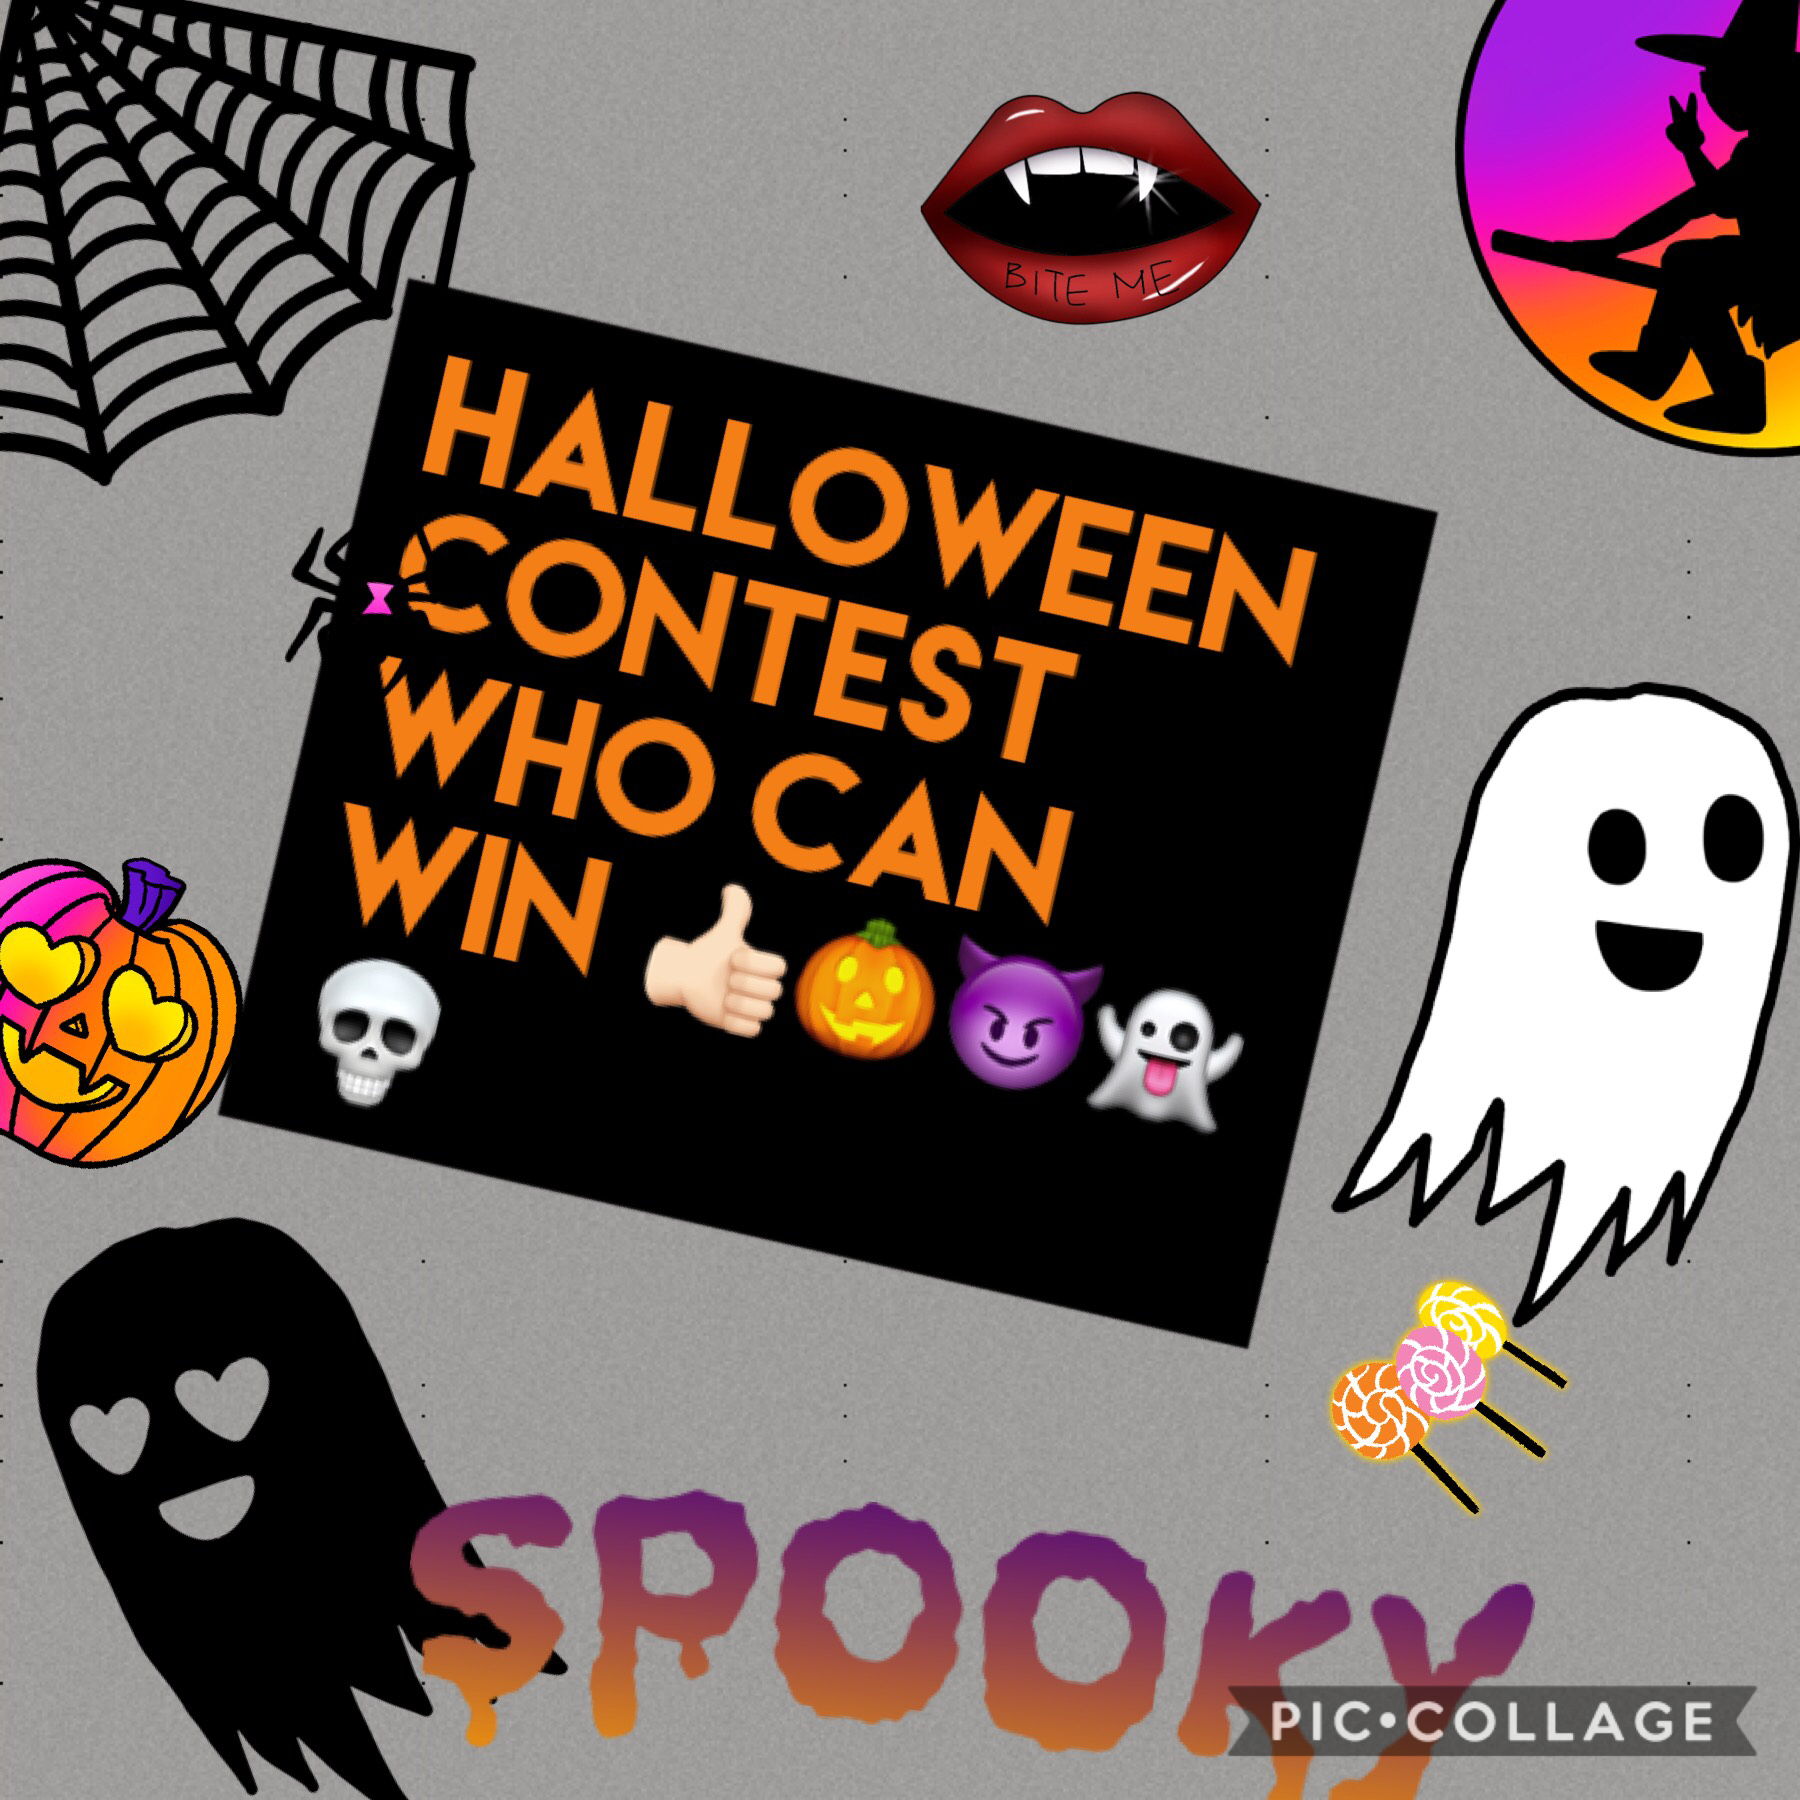 Who will win 😀😀😀🎃🎃🎃🎃🎃💀☠️👻🤡😈